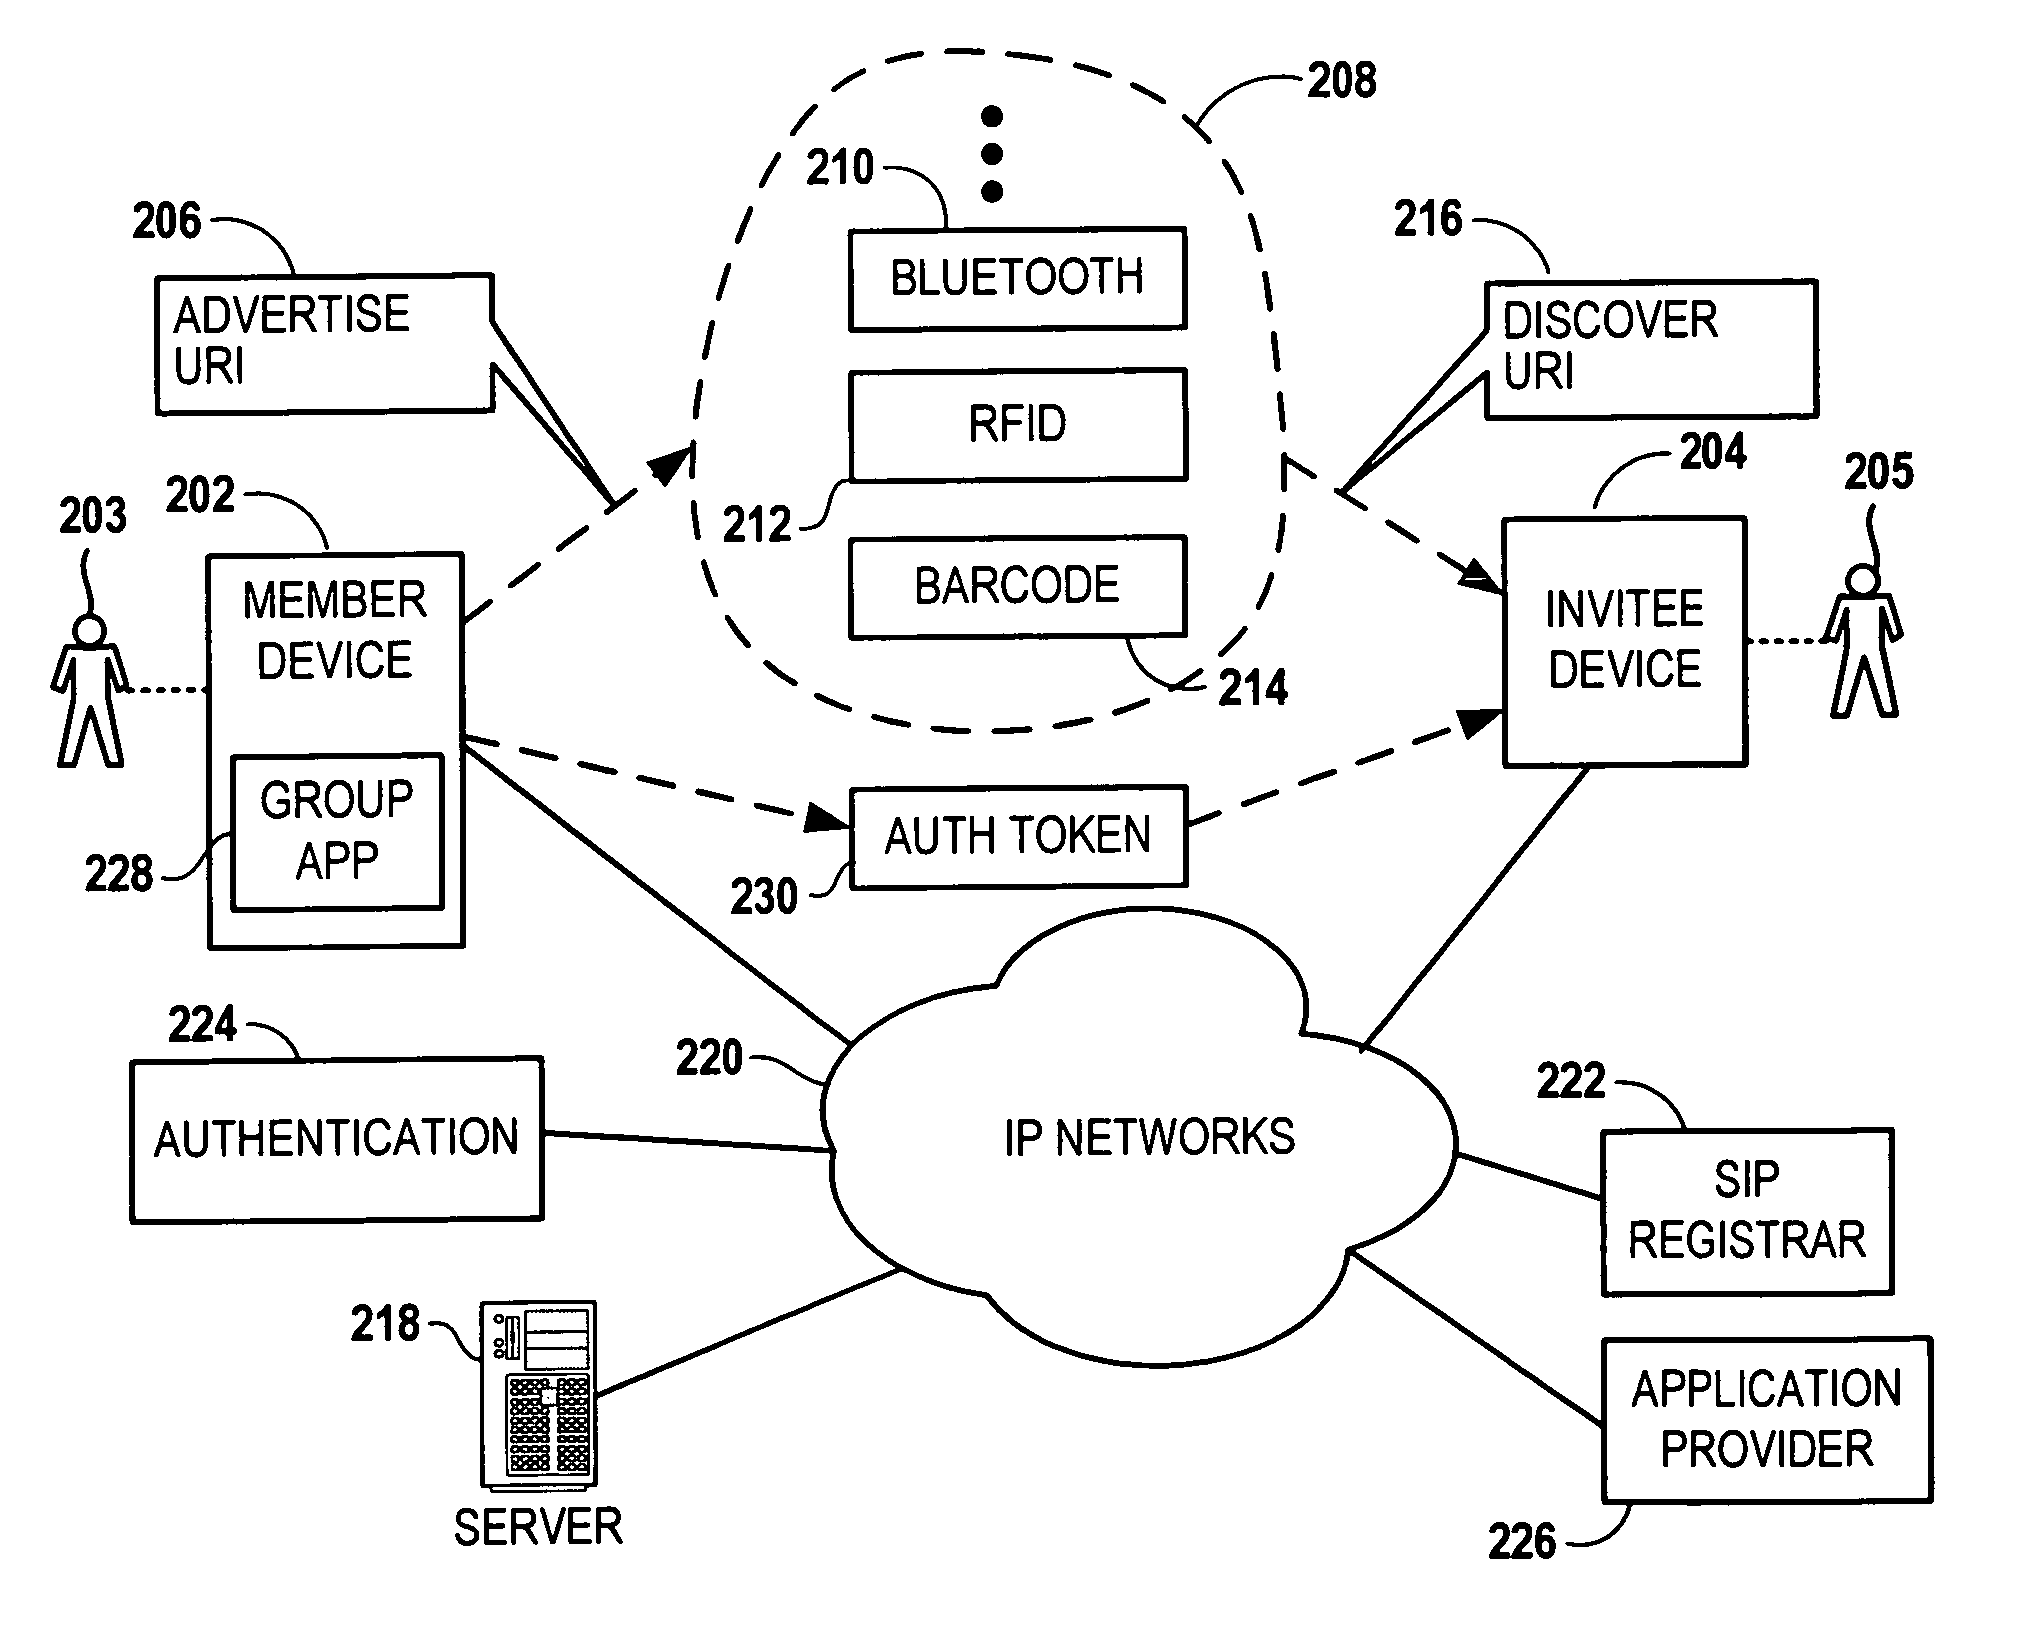 Group formation using mobile computing devices